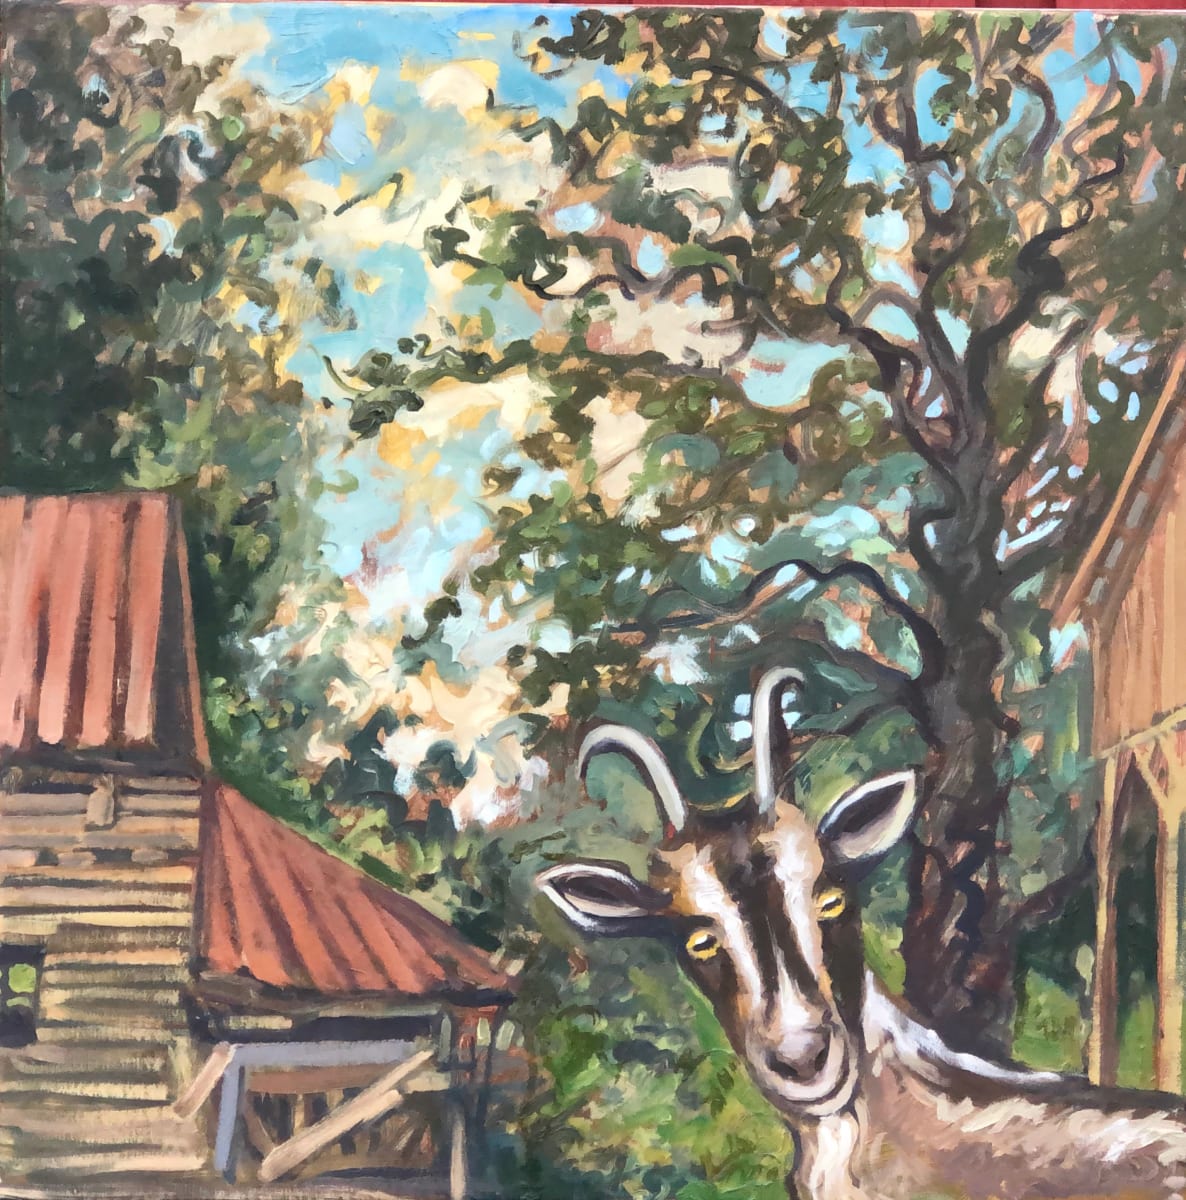 Goat Resident  Image: Started in 2017 while demonstrating plein aire painting; completed five years later.